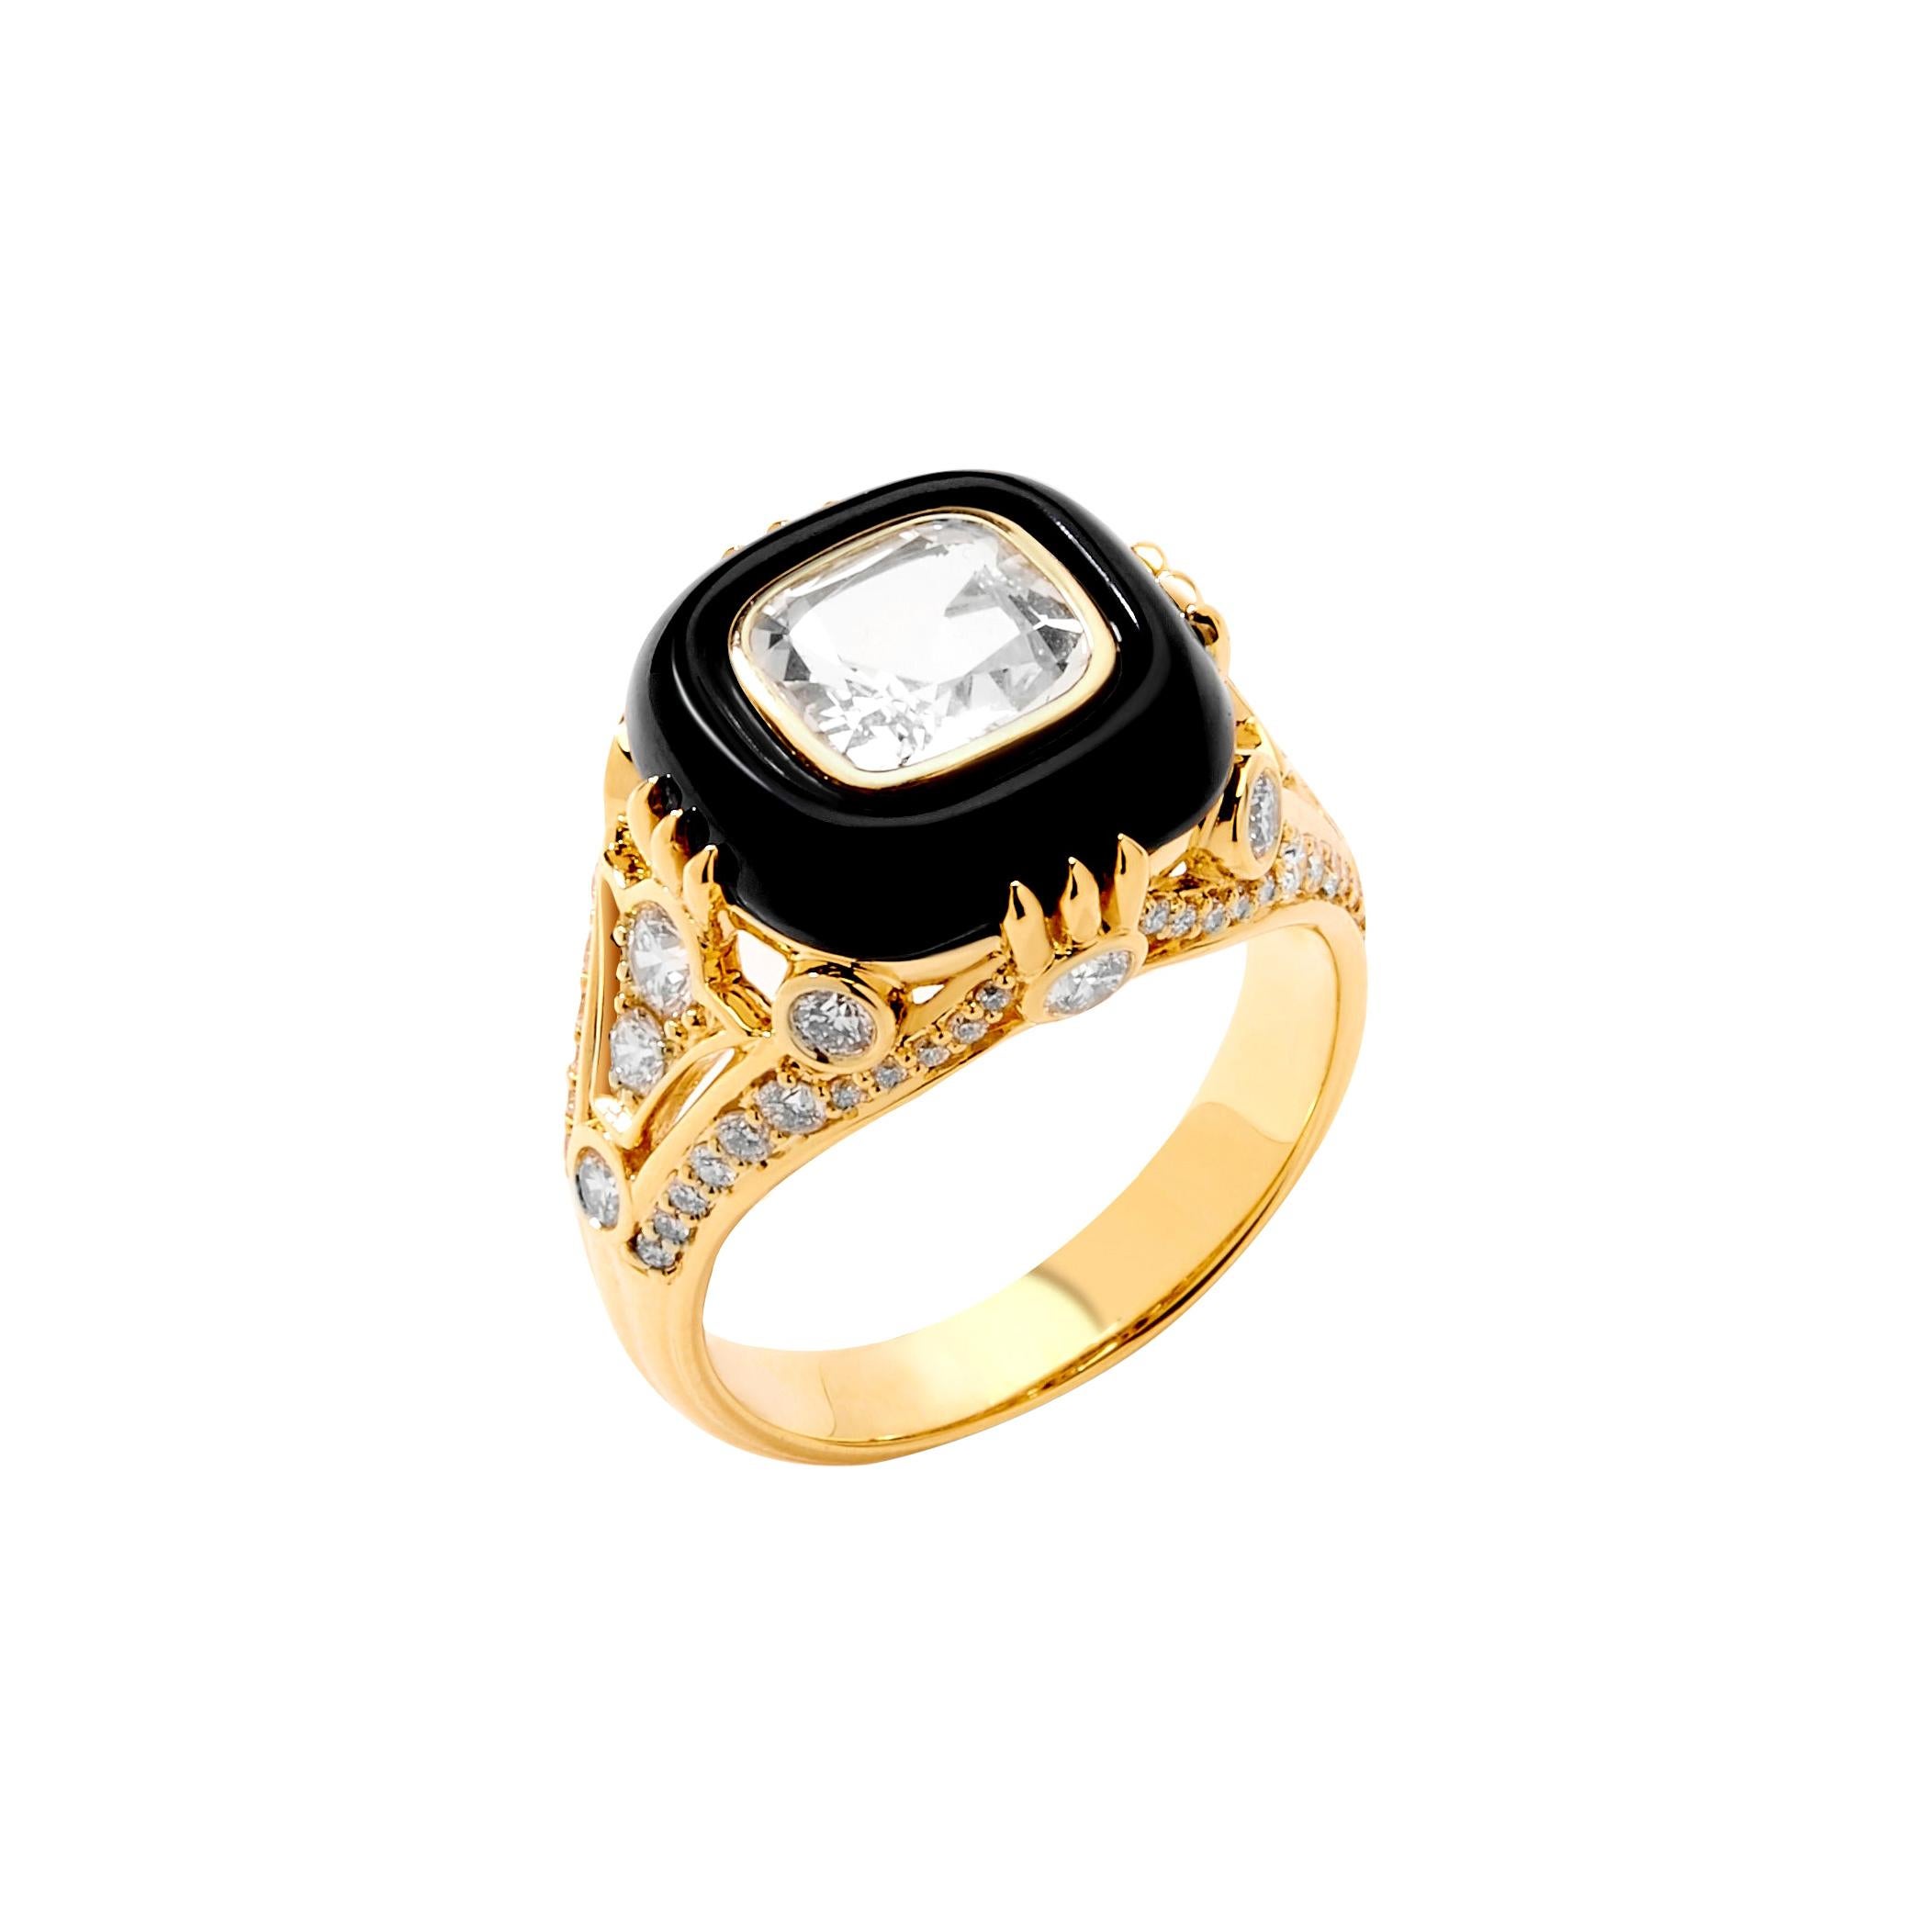 Syna Yellow Gold Ring with Rock Crystal, Black Onyx and Diamonds